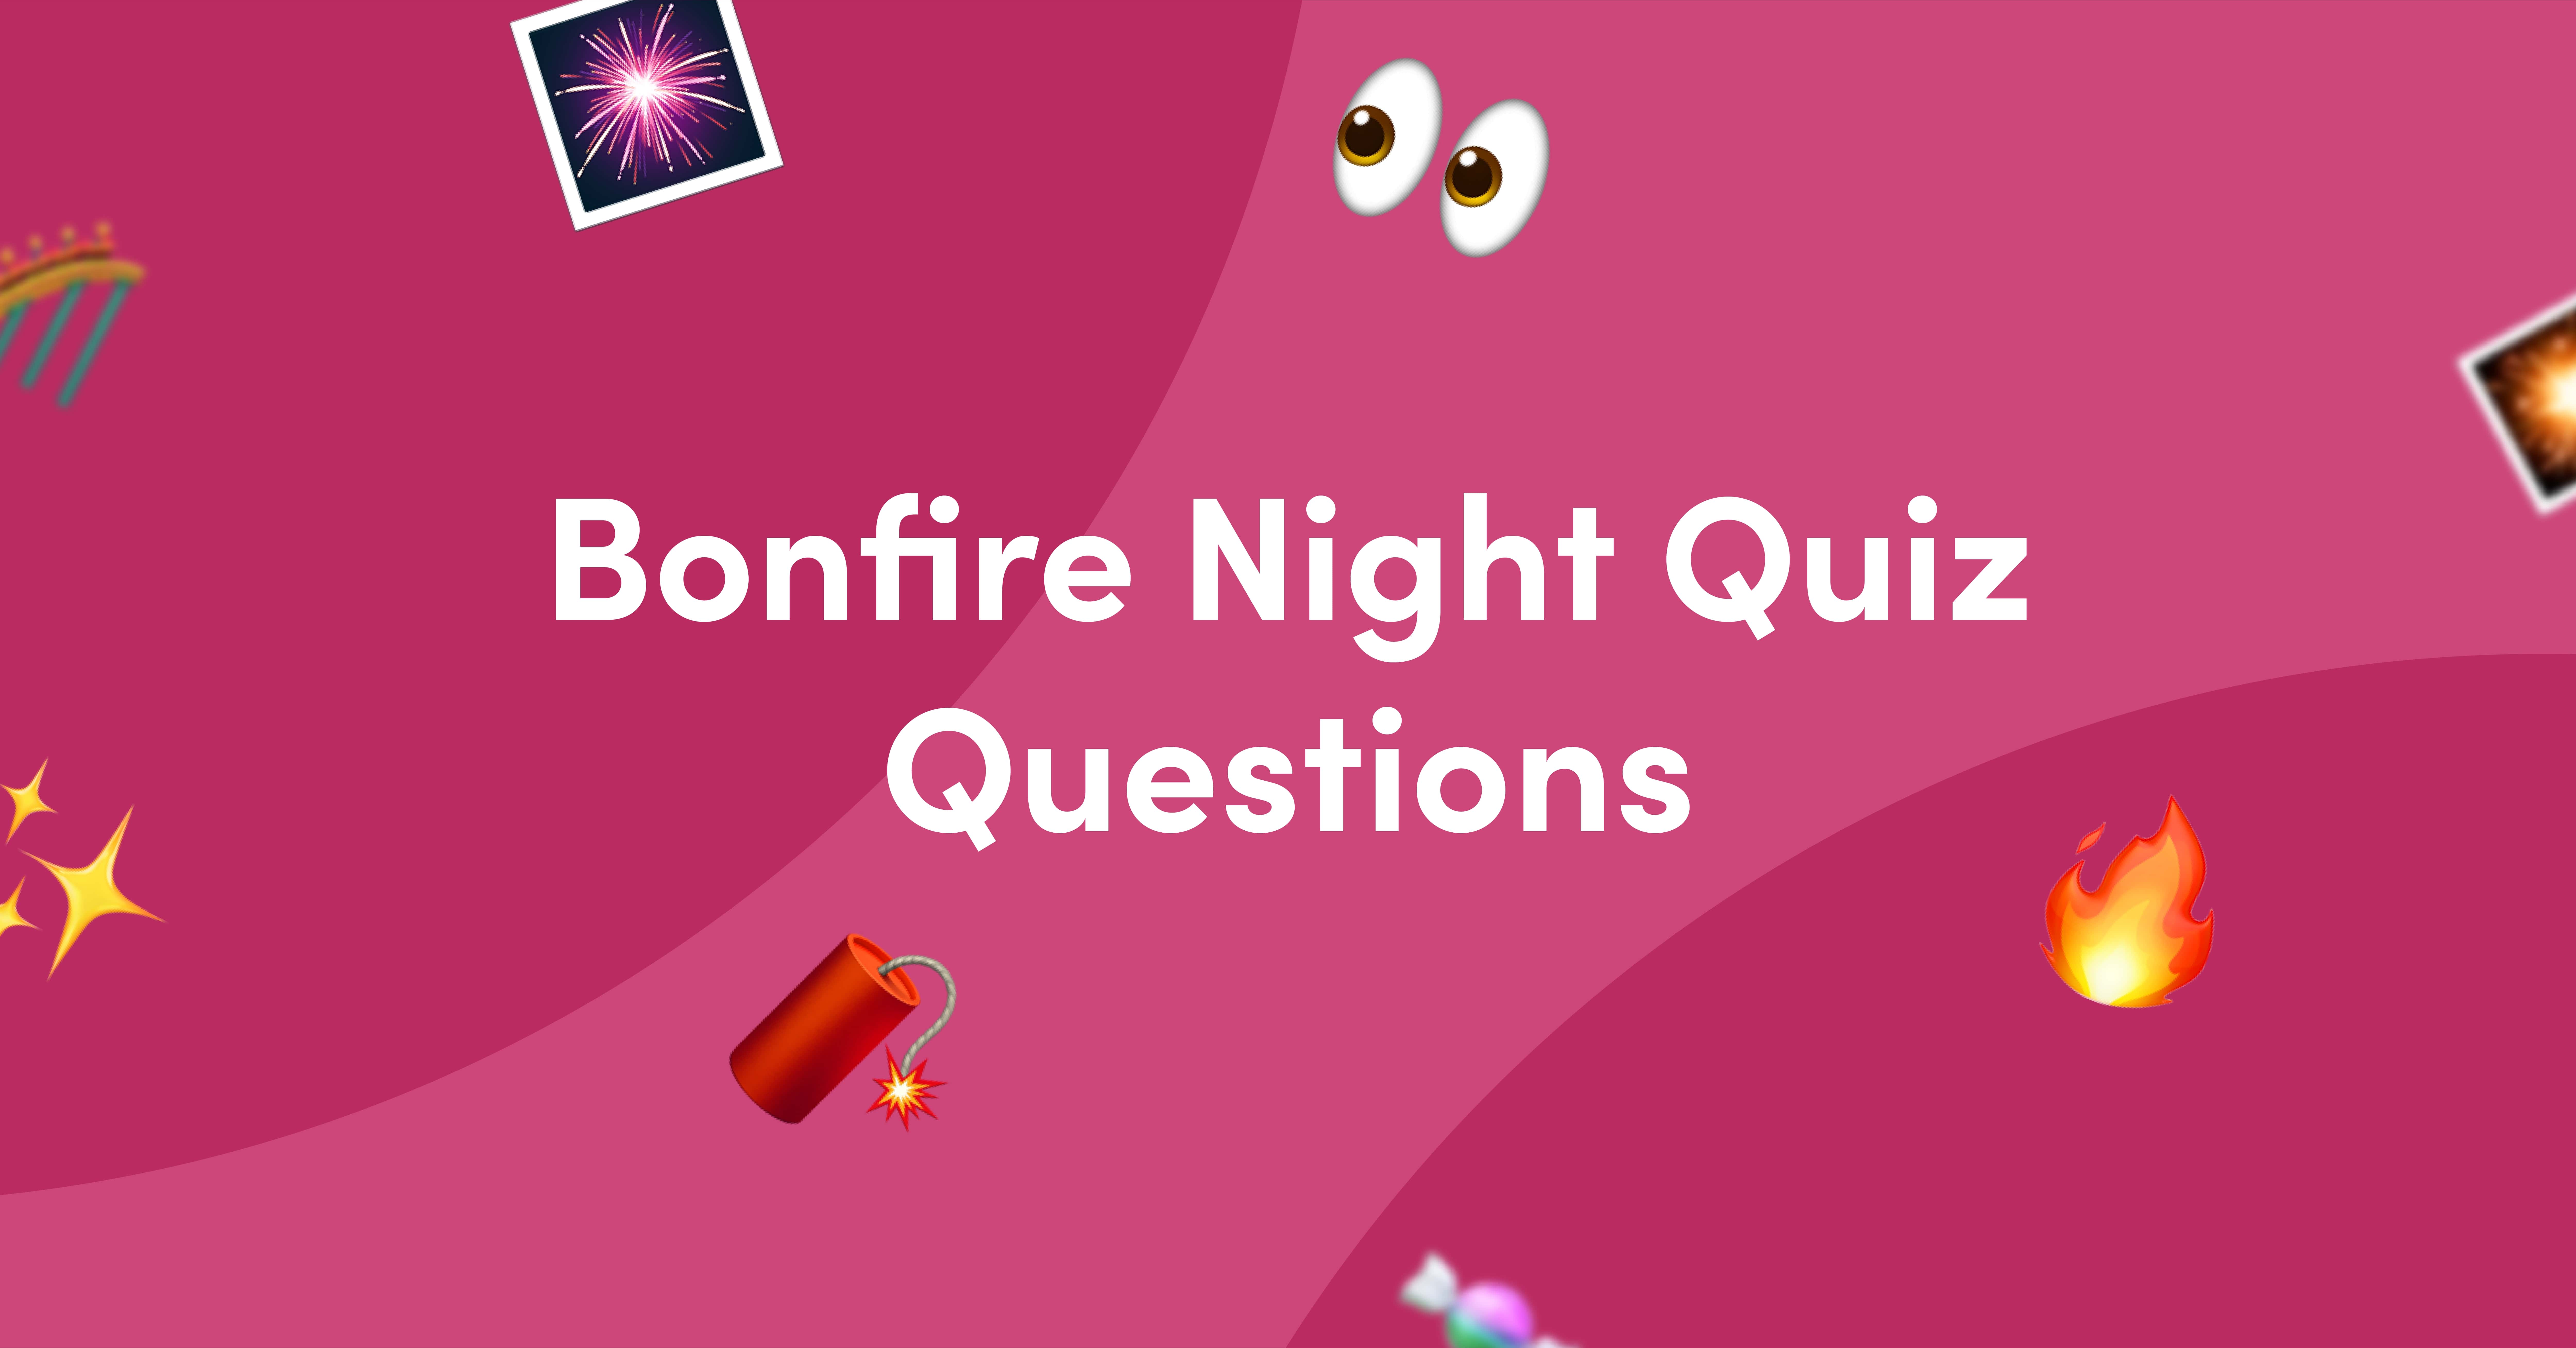 25 Bonfire Night Quiz Questions and Answers